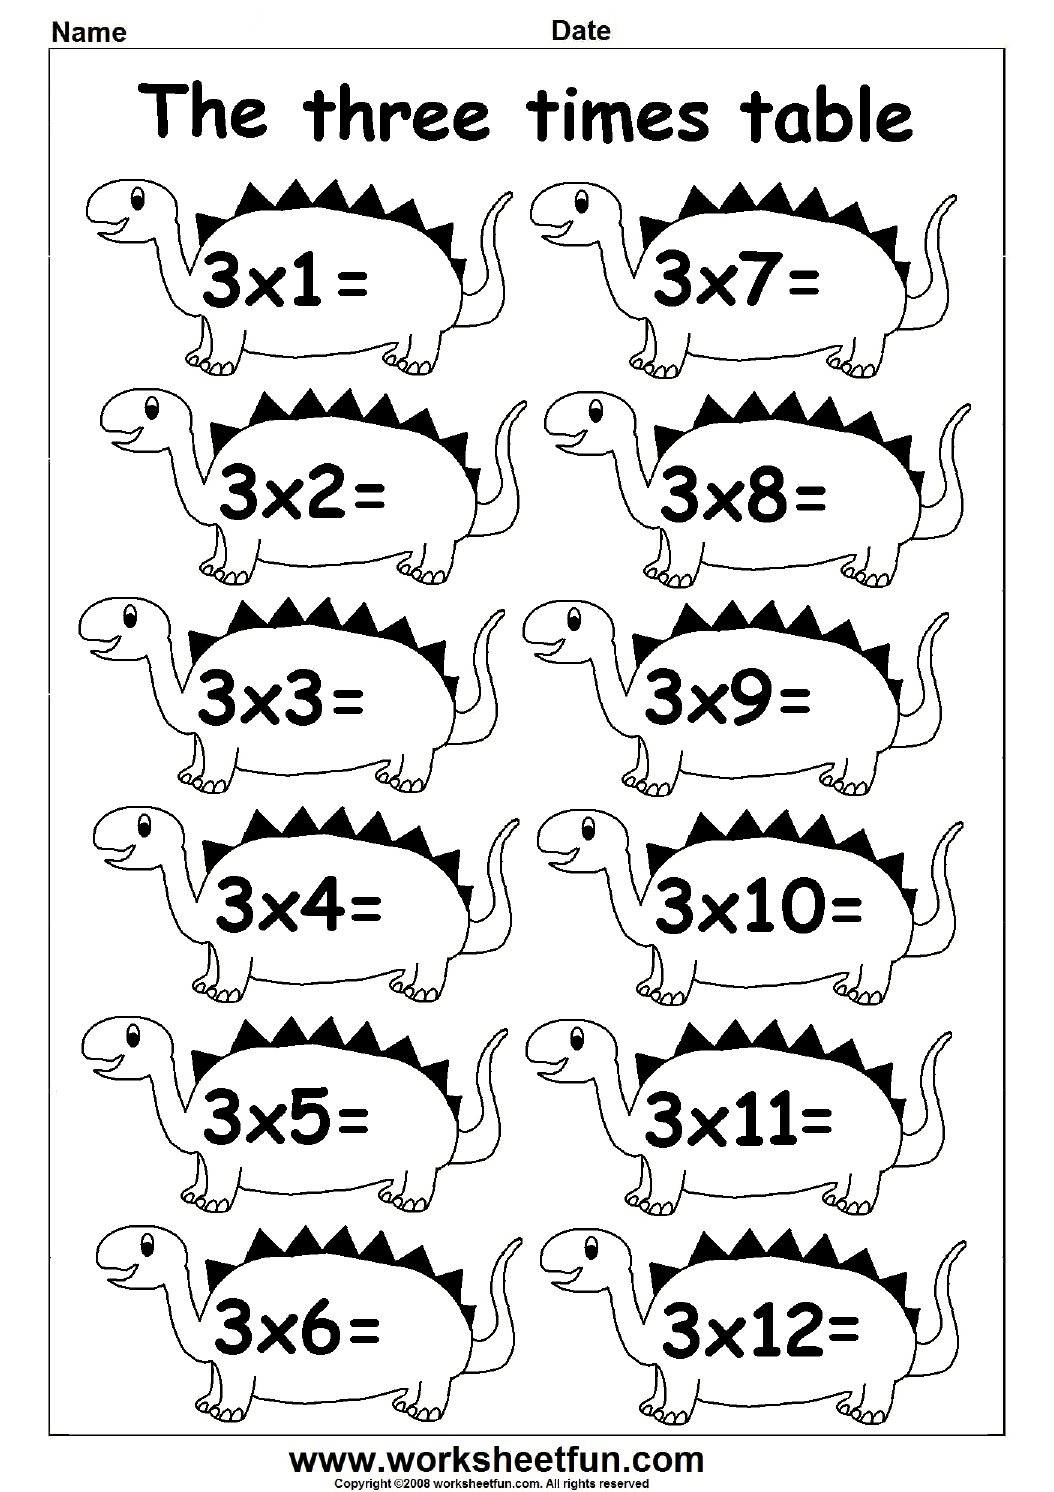 Multiplication Times Tables Worksheets – 22, 22, 22 & 22 Times Tables With Regard To 3 Times Table Worksheet